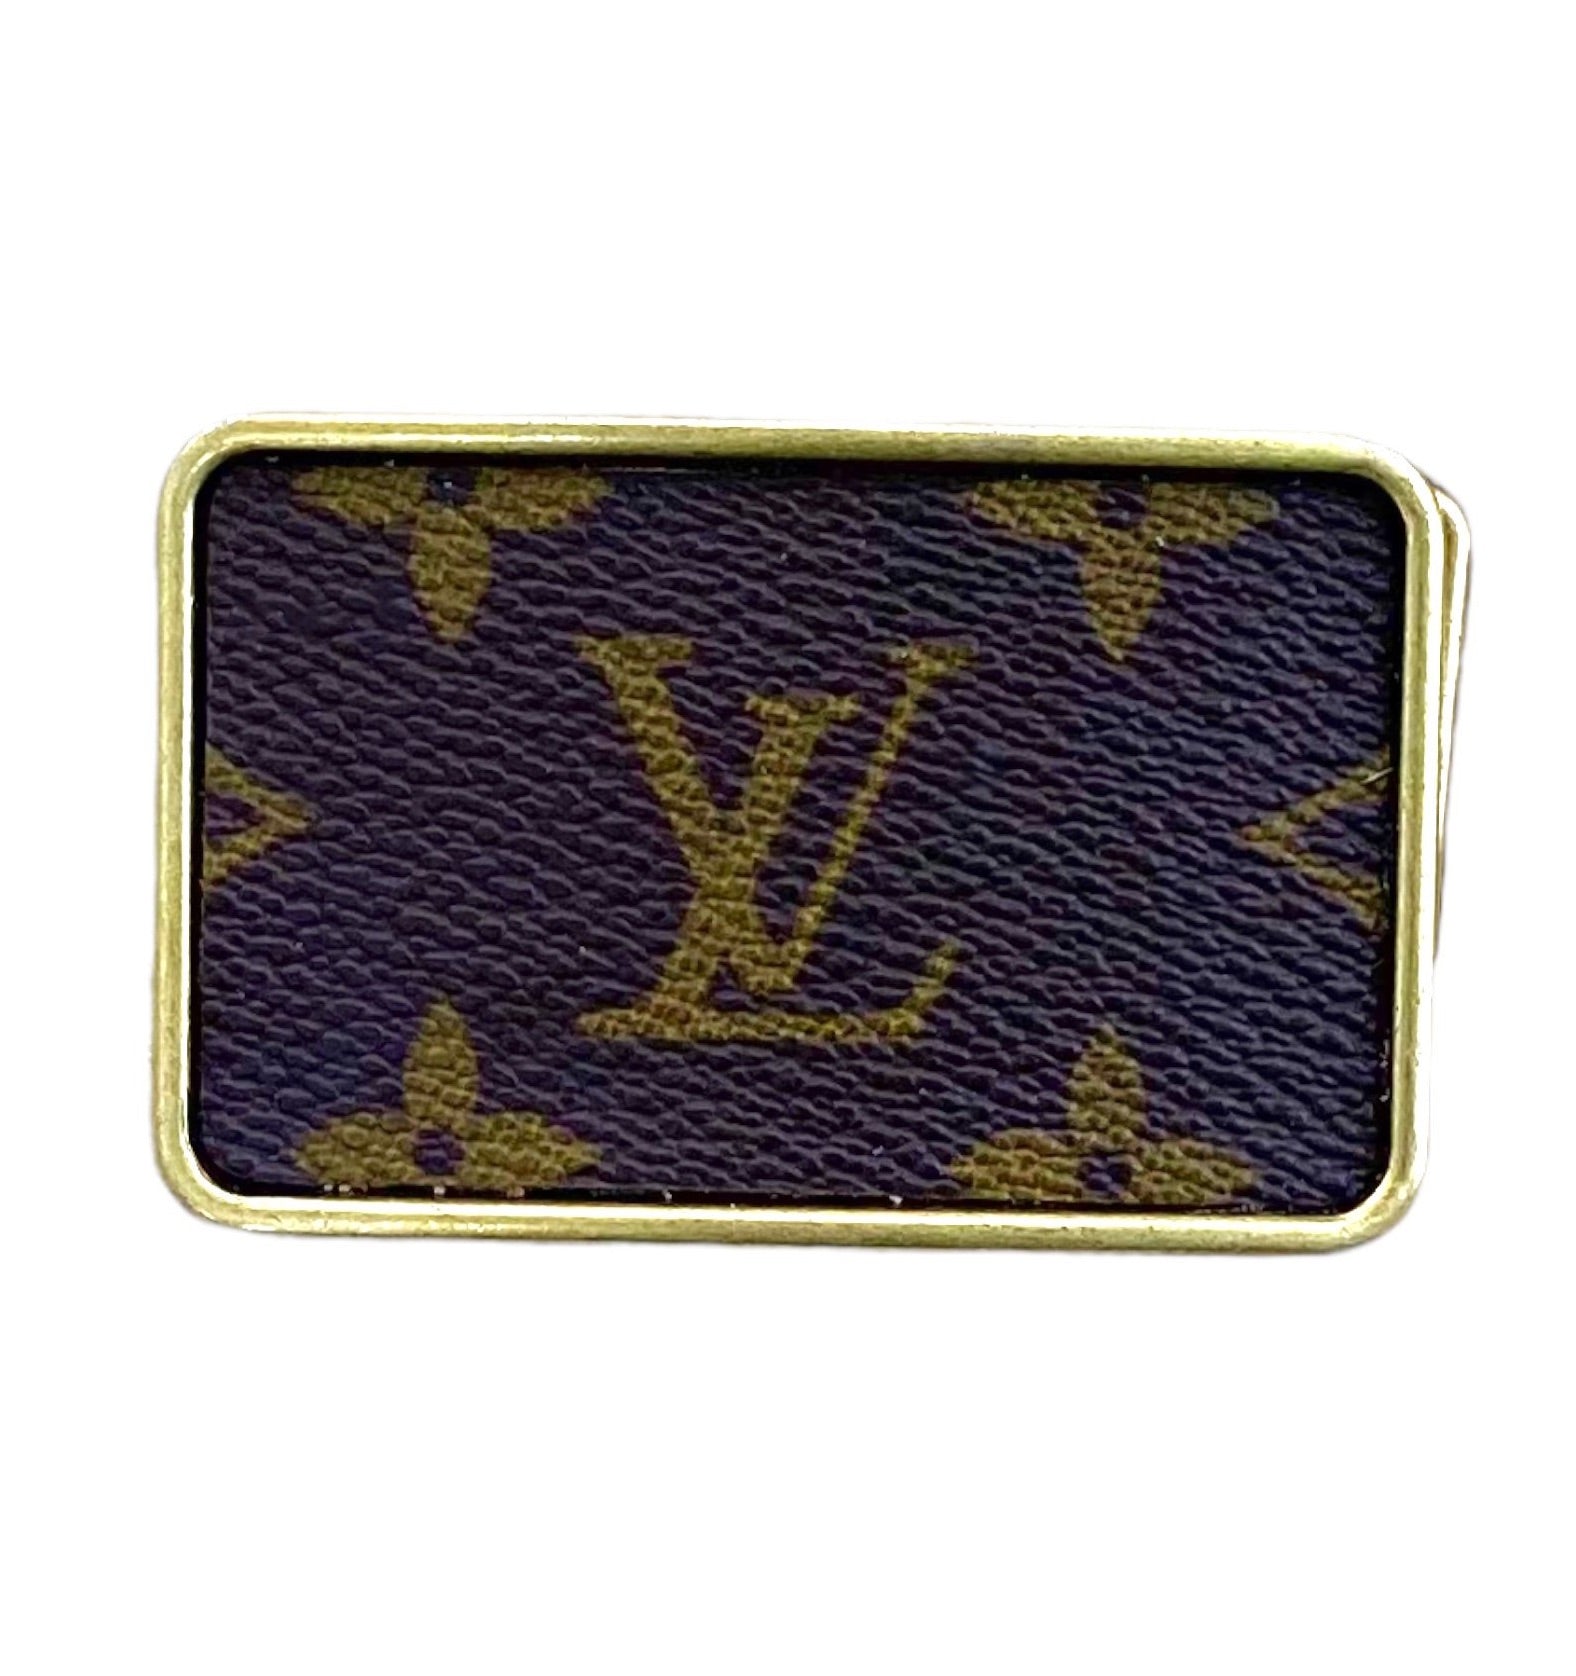 Buy Upcycled LV coin purse - Repurposed Louis Vuitton - Louis